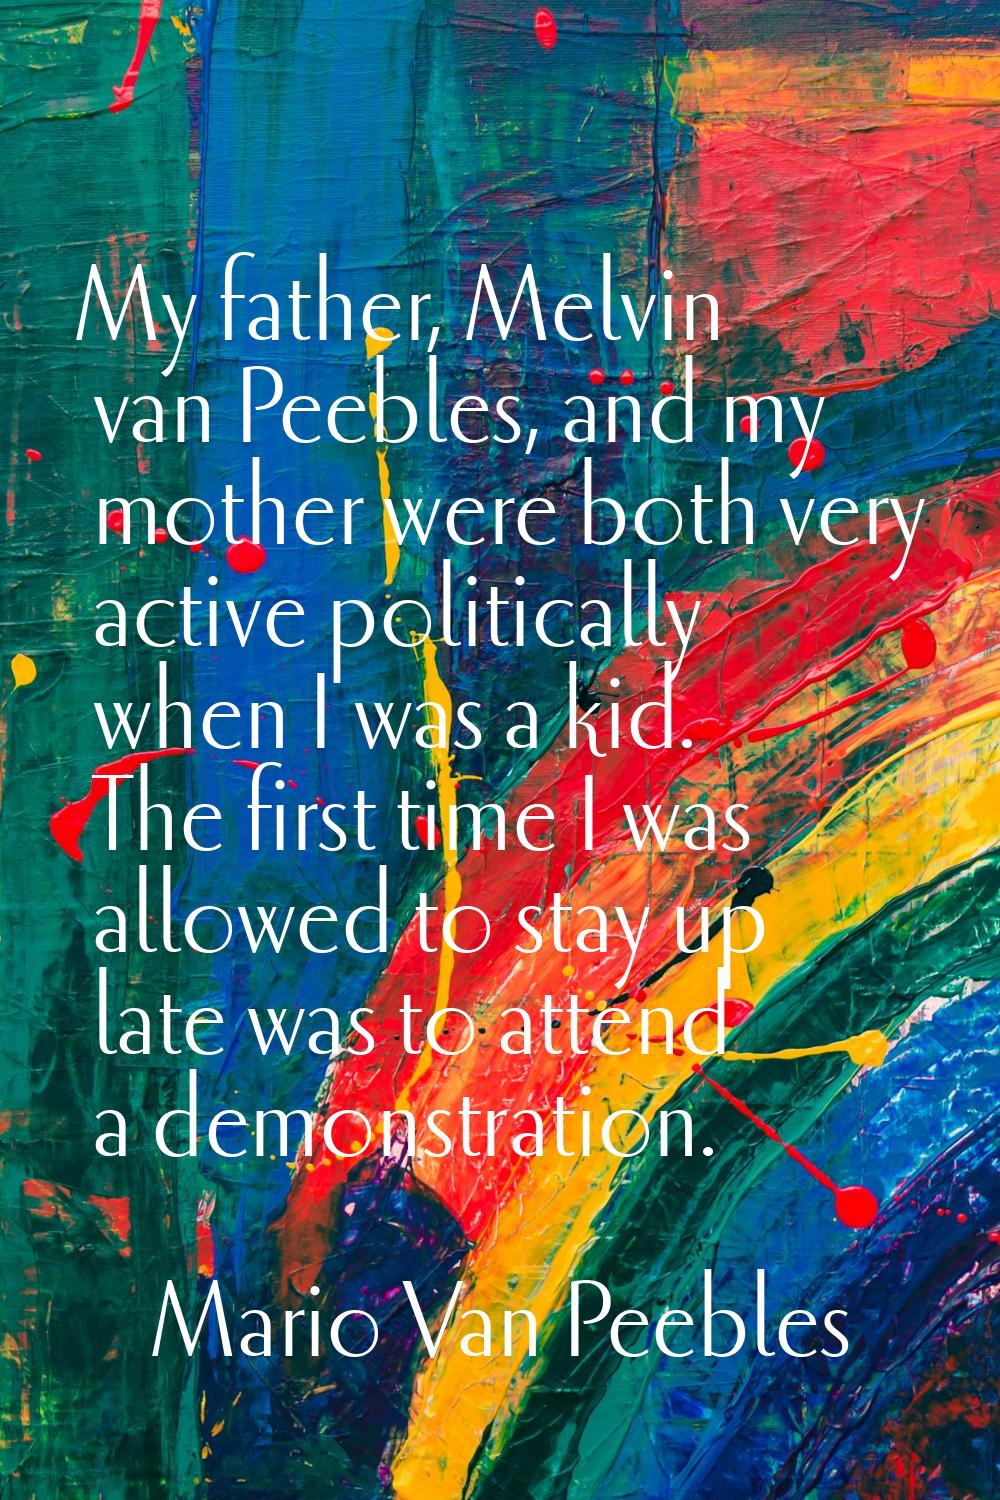 My father, Melvin van Peebles, and my mother were both very active politically when I was a kid. Th